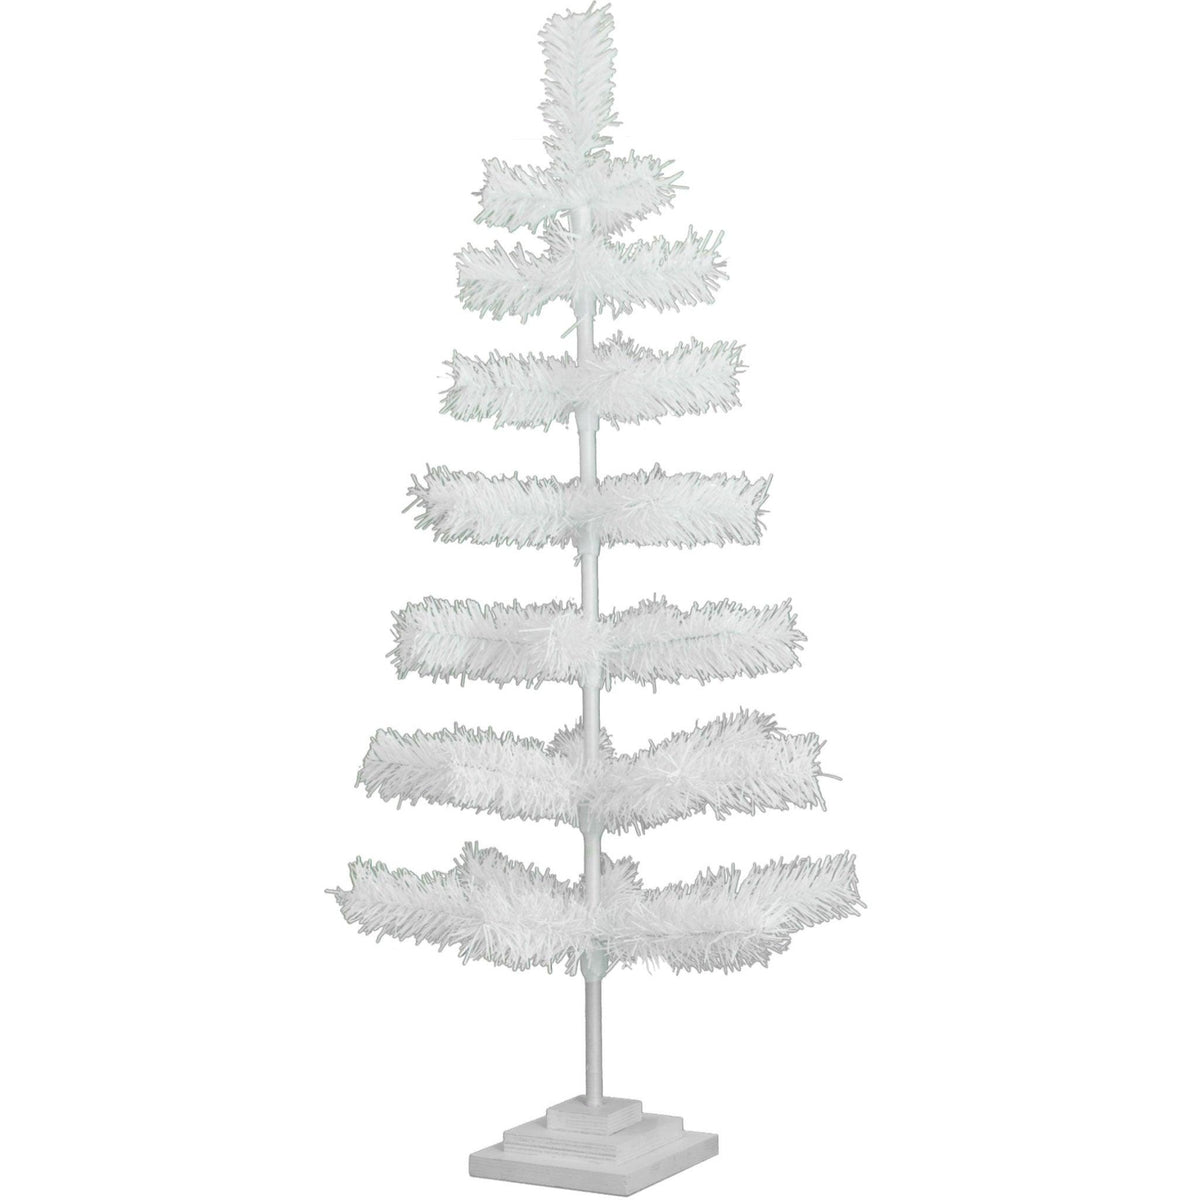 Lee Display's classic 36in White Tinsel Christmas Trees on sale now at leedisplay.com